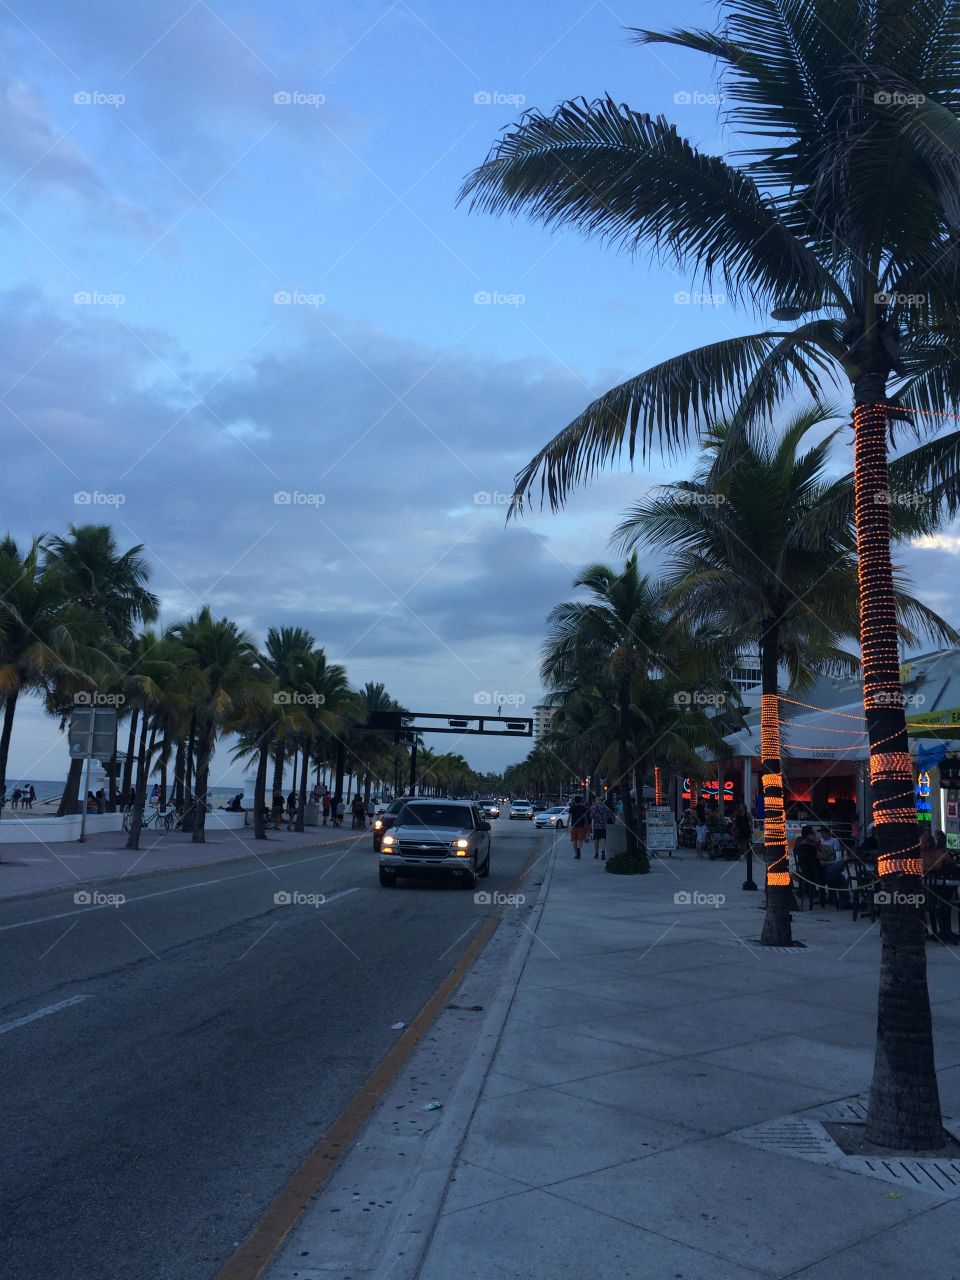 Stores and bars. Down town beach Lauderdale 